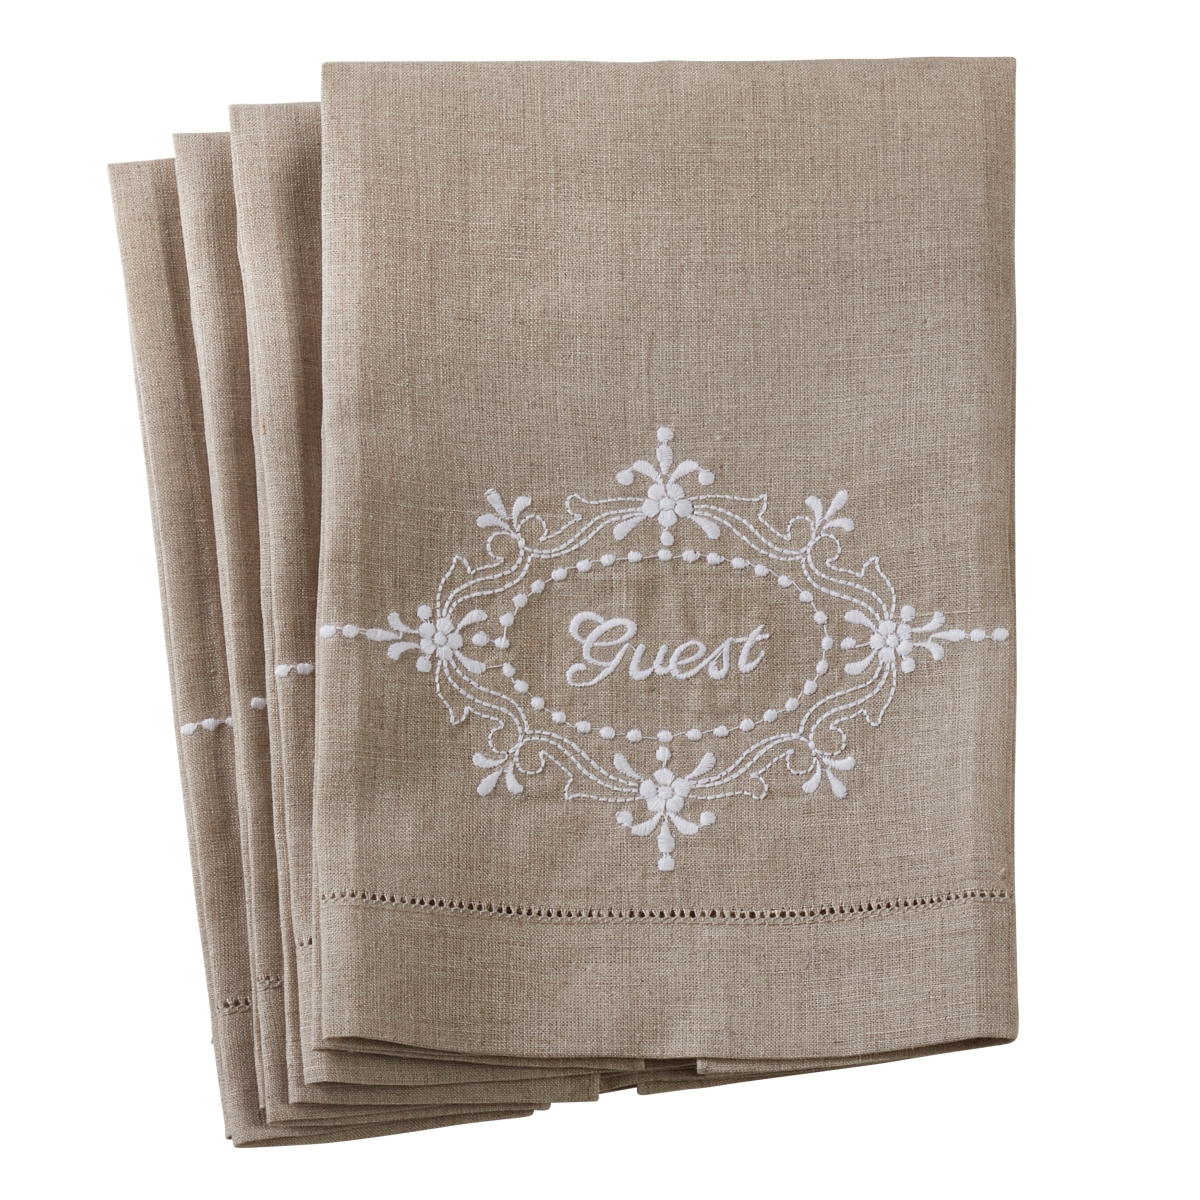 15068.n1422 14 X 22 In. Embroidered Hemstitch Towel - Natural, Set Of 4